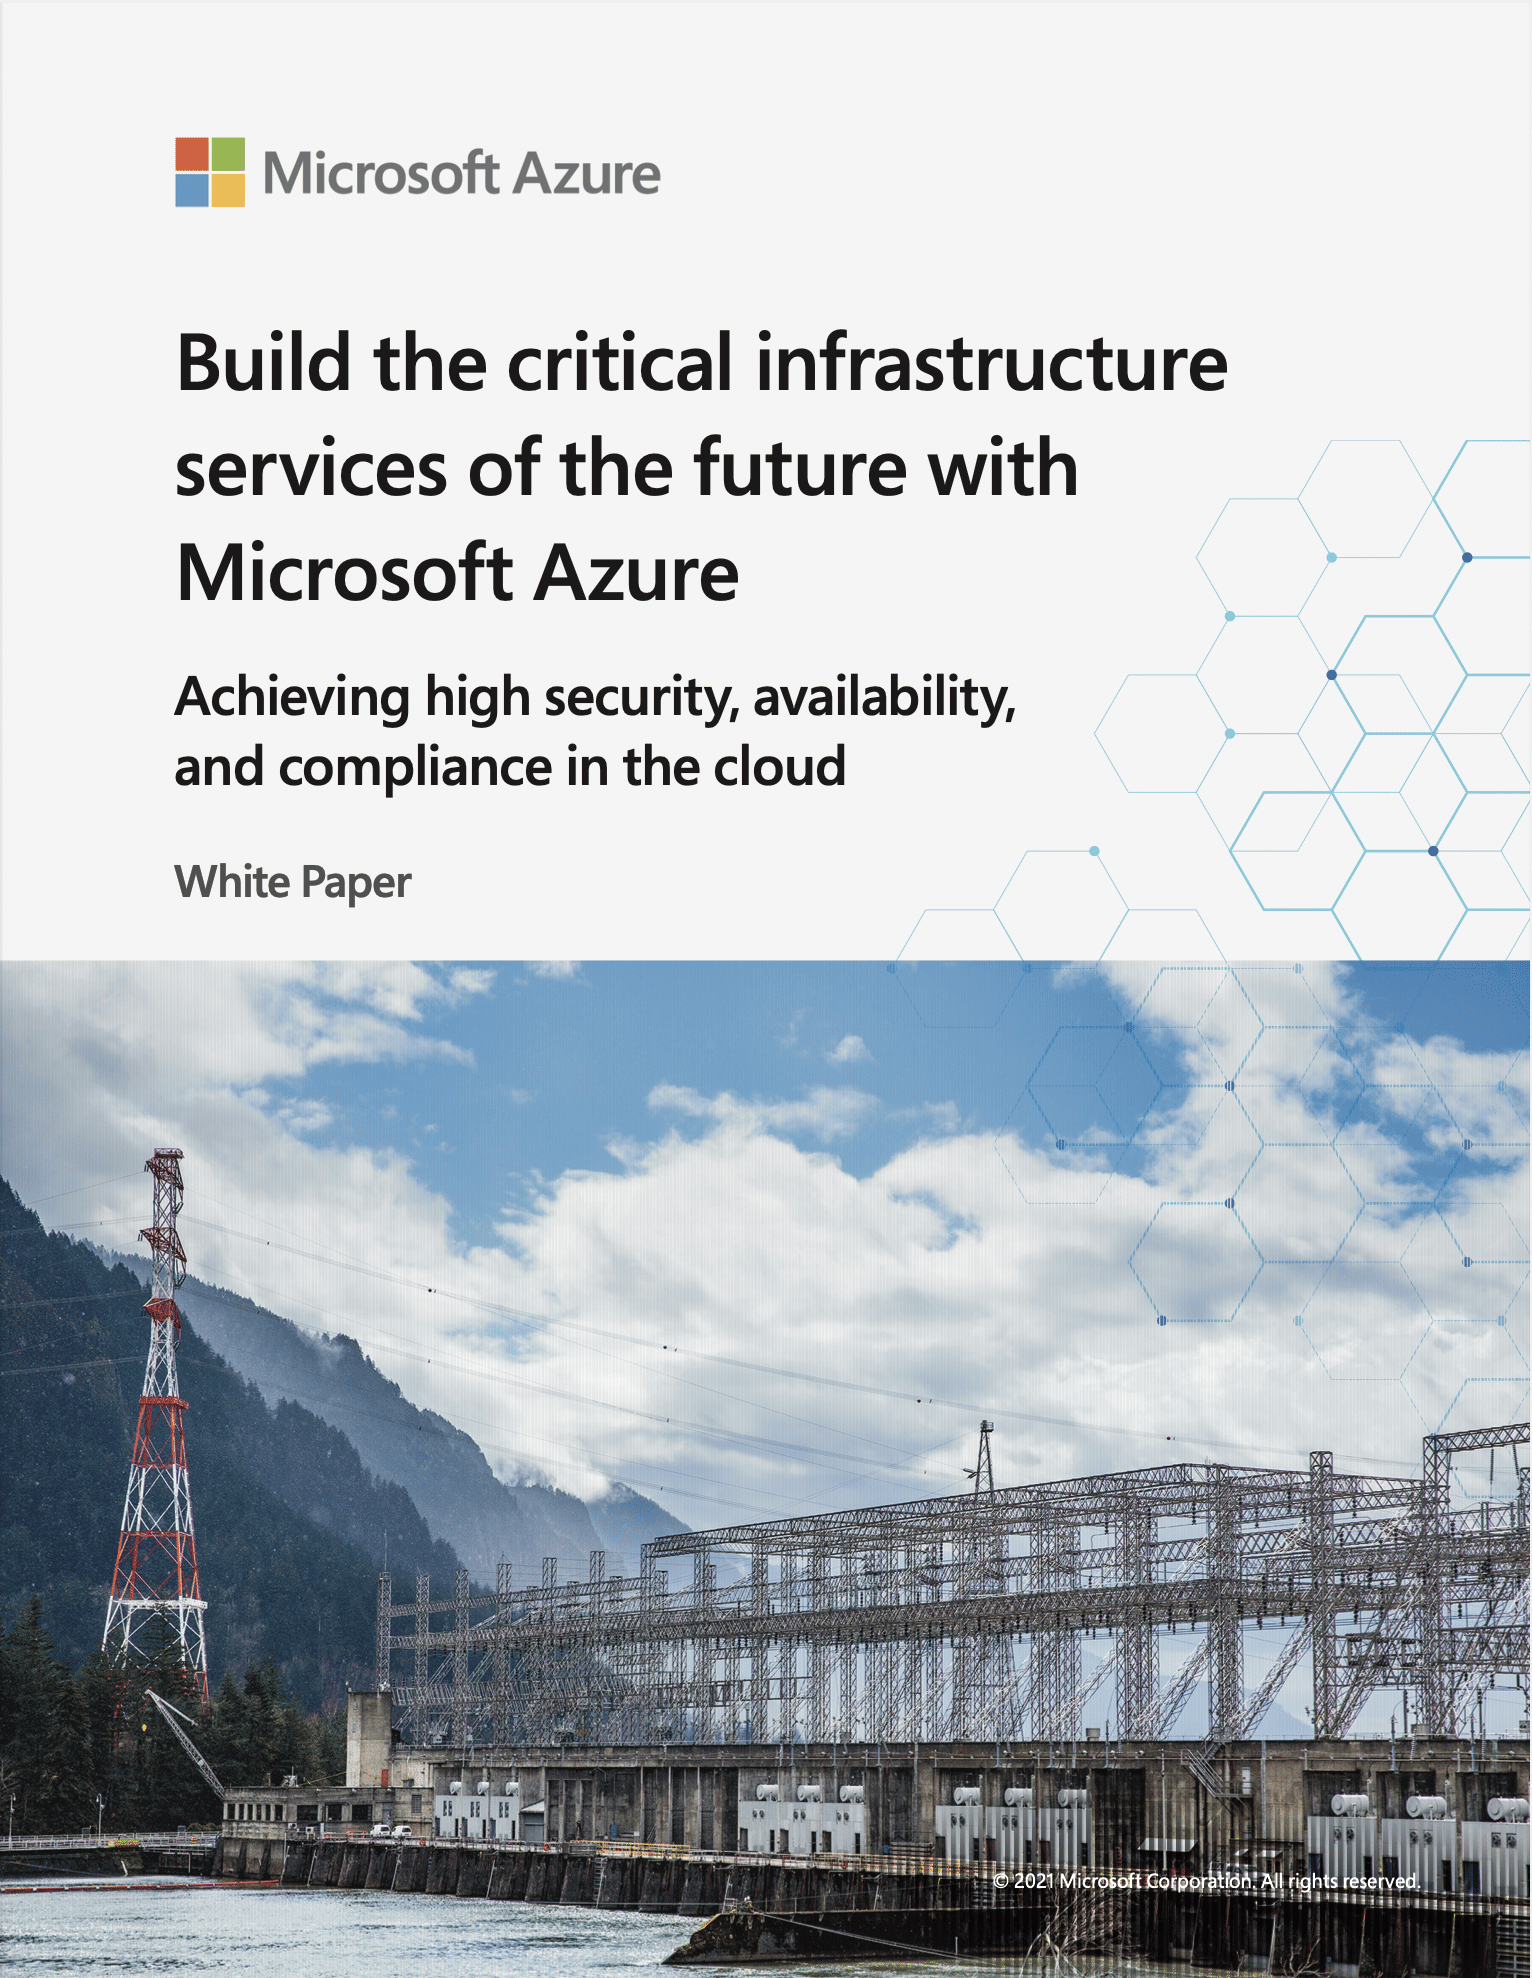 Build the critical infrastructure services of the future with Microsoft Azure 7